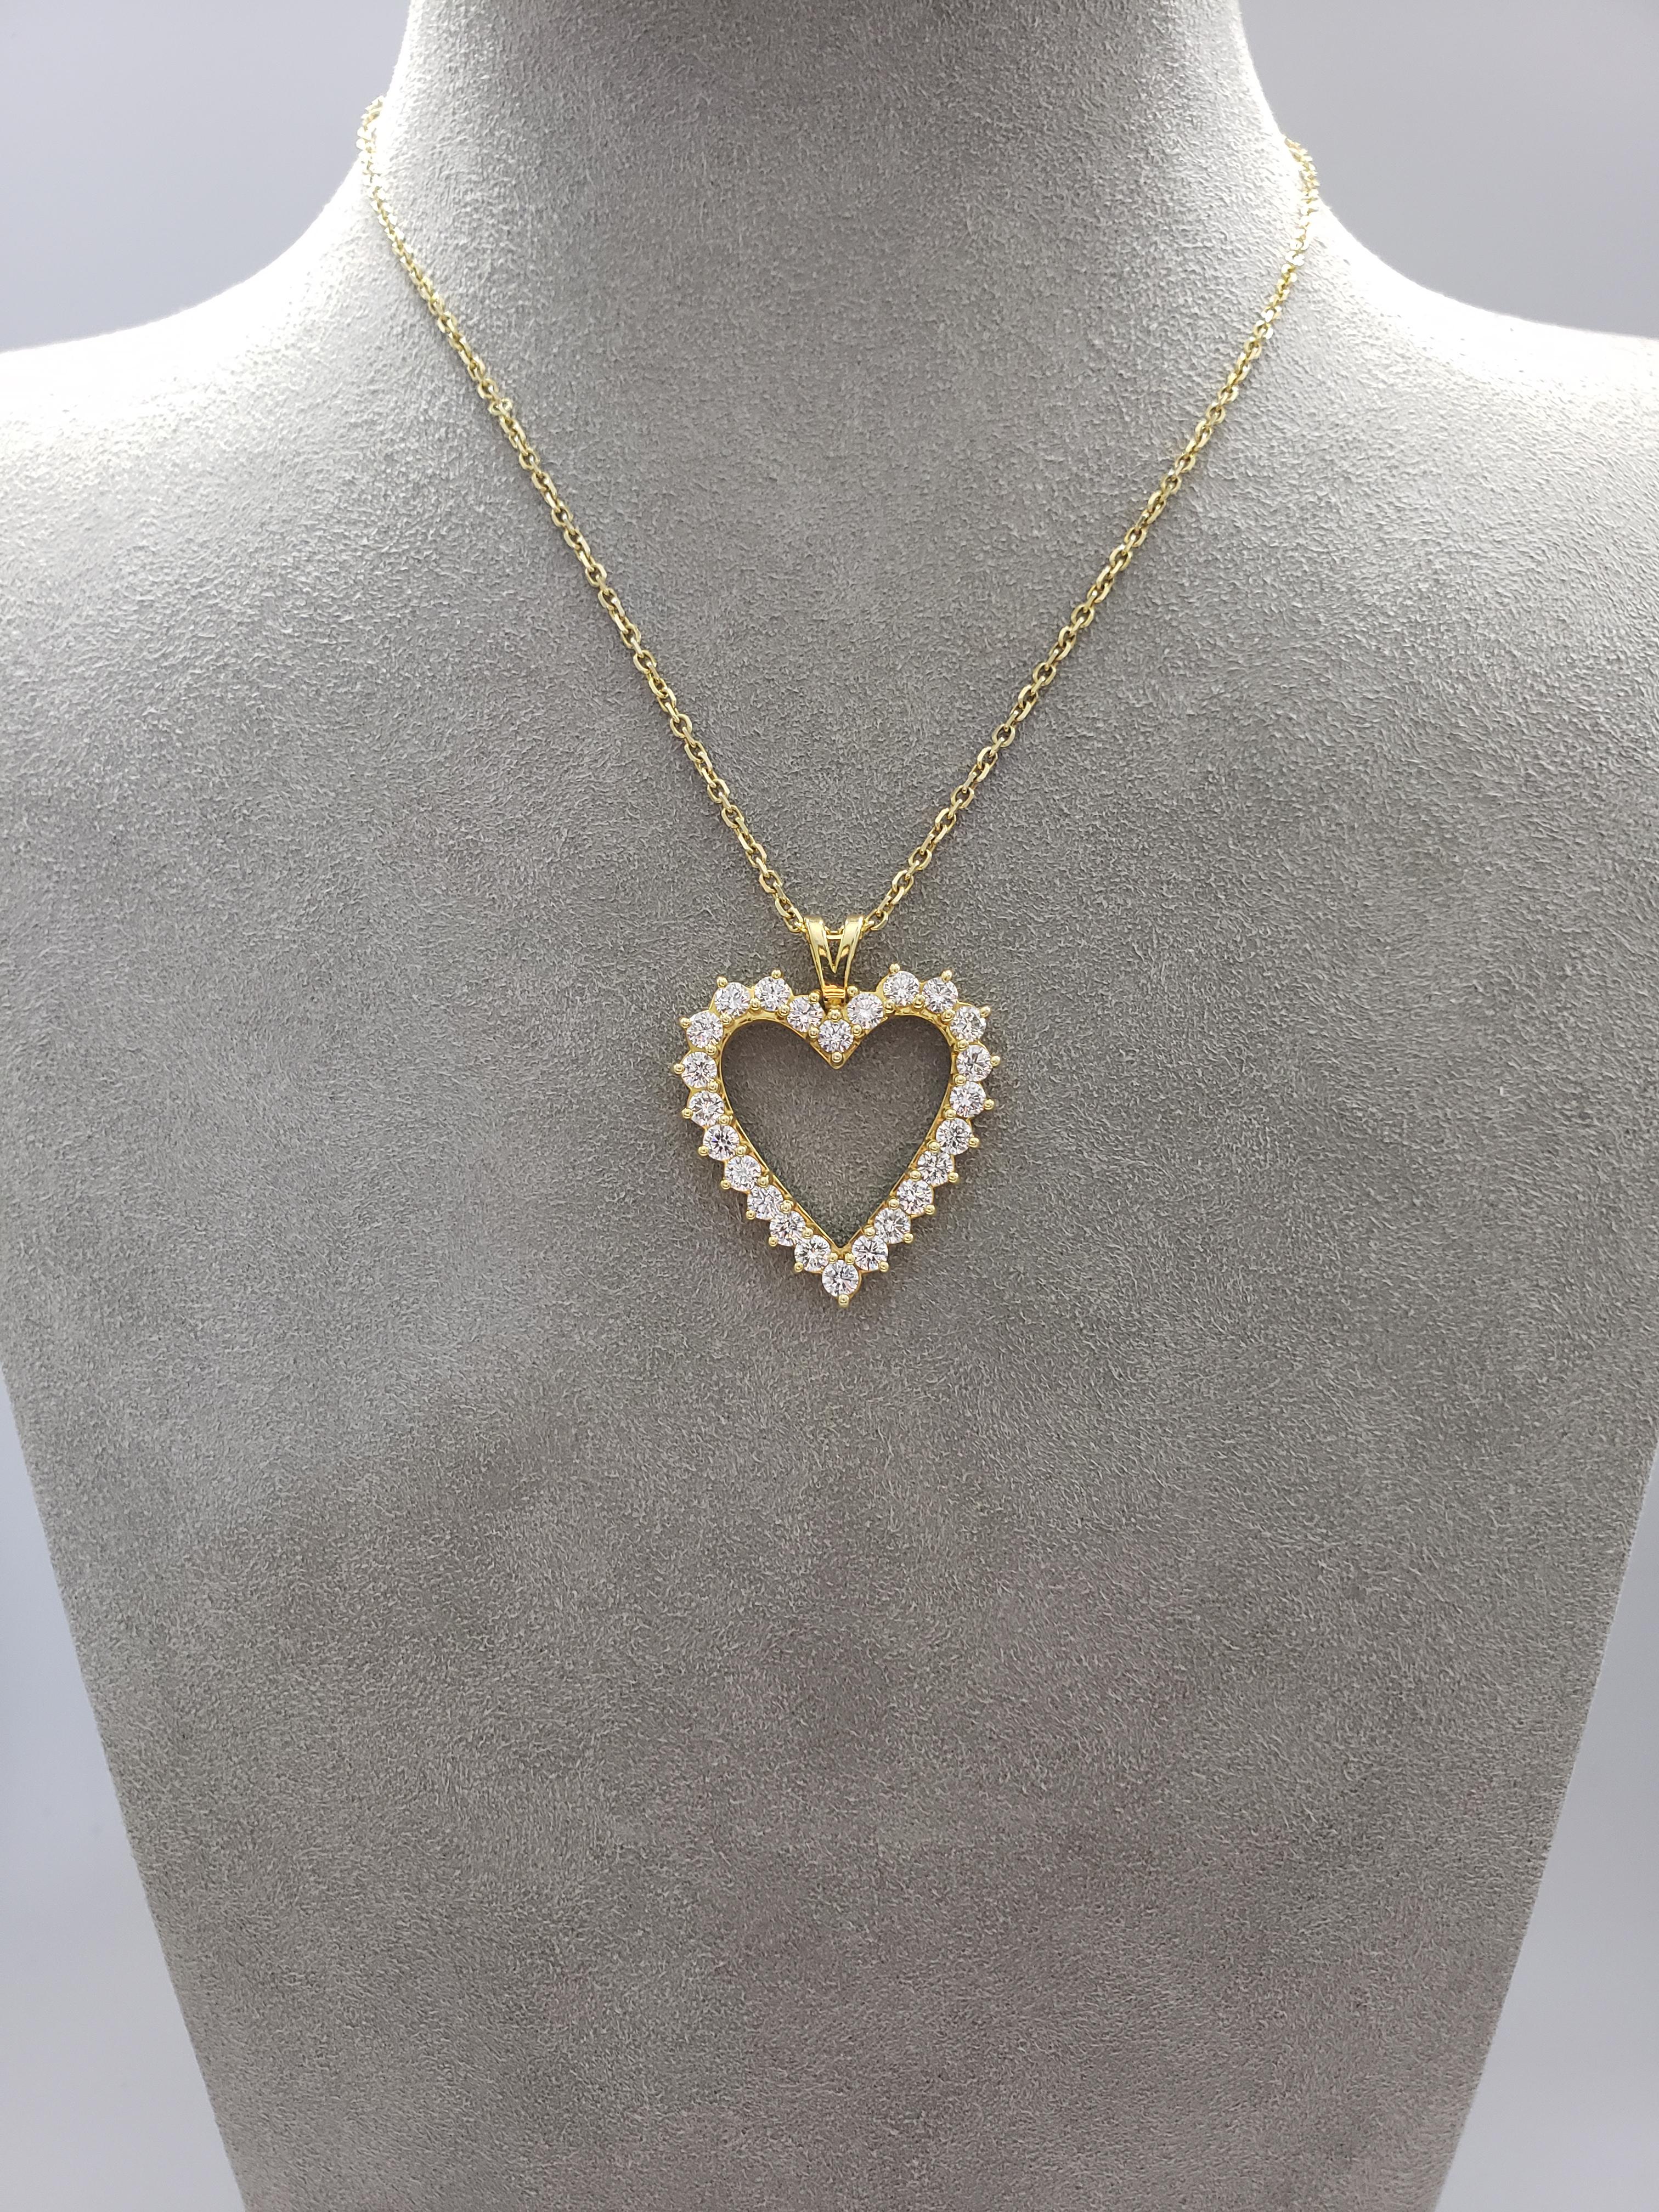 Of open-work design, showcasing brilliant round diamonds set in a heart shape. Diamonds weigh 2.92 carats total. Set in 18 karat yellow gold. Attached to an 14 inch yellow gold chain.

Style available in different price ranges. Prices are based on